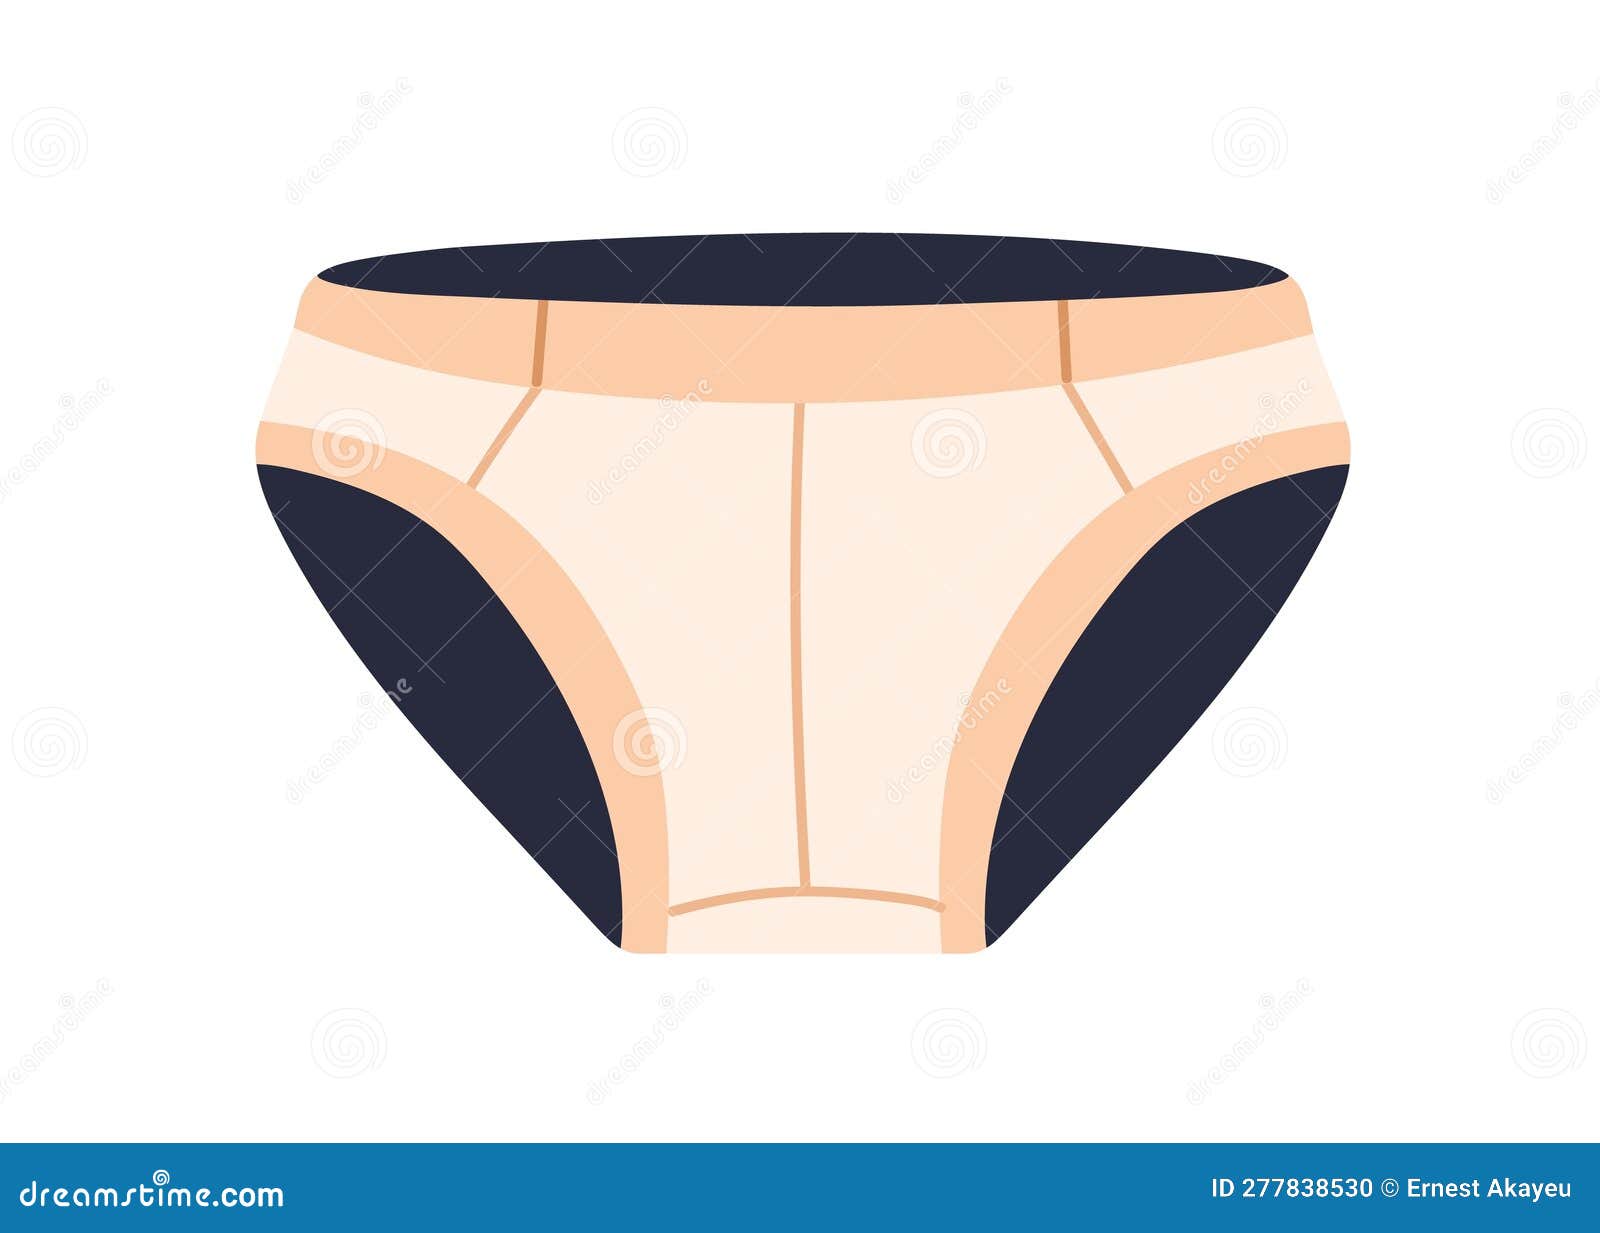 Male Panties, Underwear. Men Pants, Briefs Model. Modern Mens Underclothing,  Underpants with Elastic Waistband Stock Vector - Illustration of style,  swimwear: 277838530